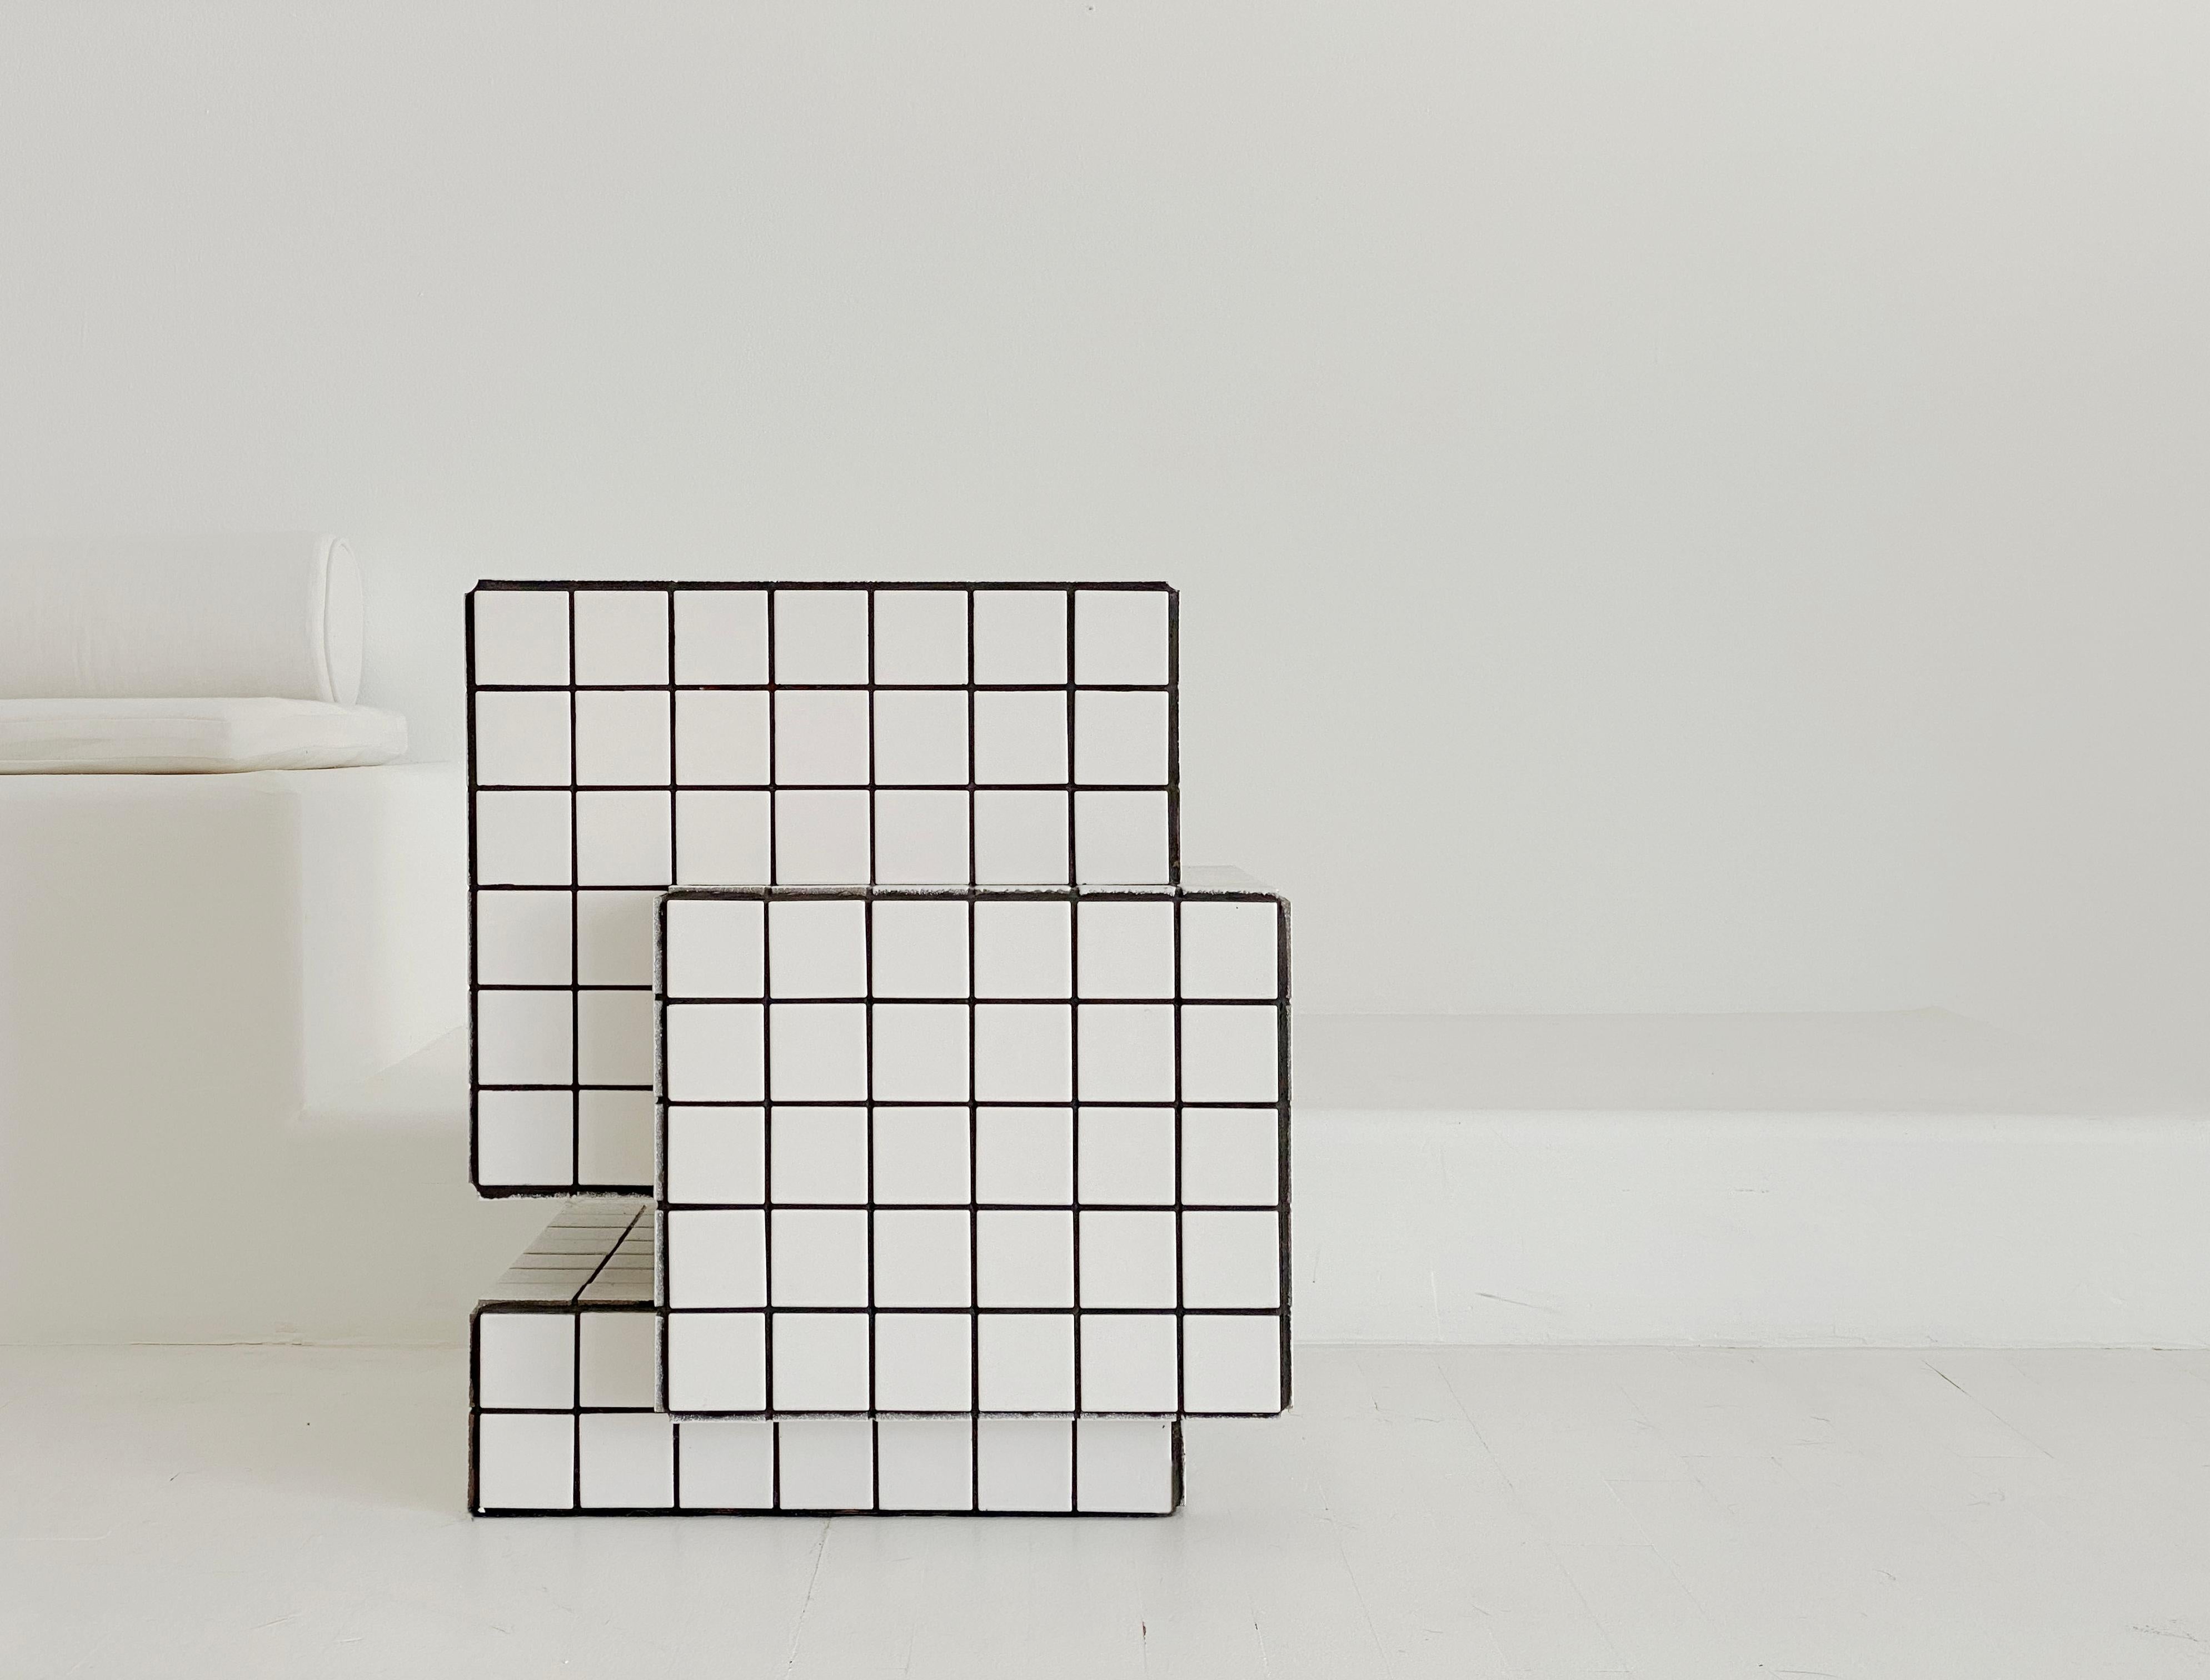 Designed and made by Nima Abili in Los Angeles this handcrafted side table is cladded with white semi-matte porcelain tiles and unsanded black grout. Inspired by Brutalist style of architecture this collection offers a variety of pieces designed